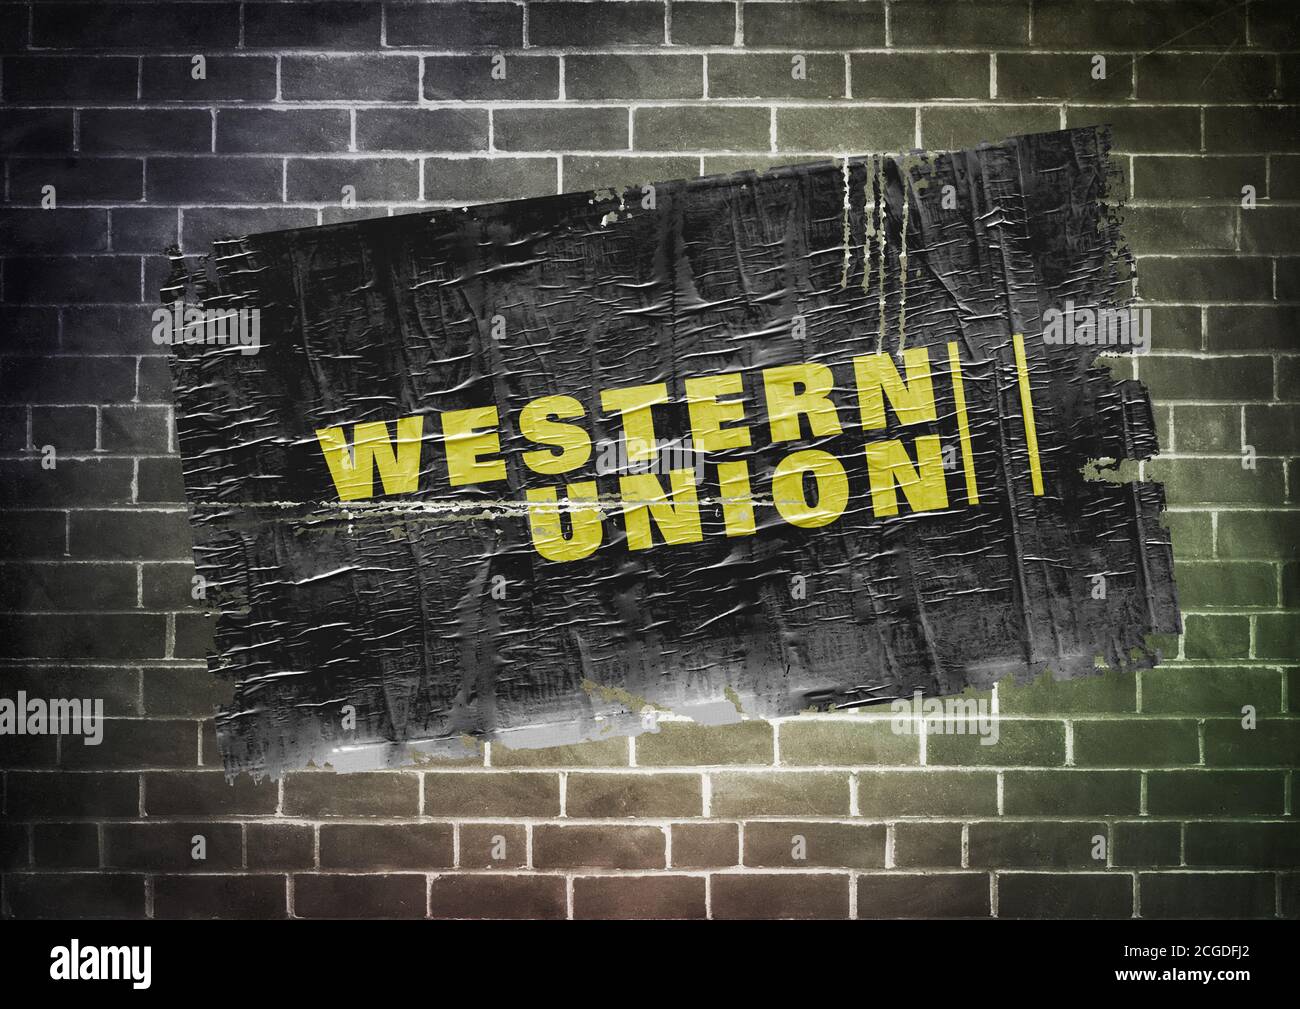 Western Union Logo: Over 993 Royalty-Free Licensable Stock Vectors